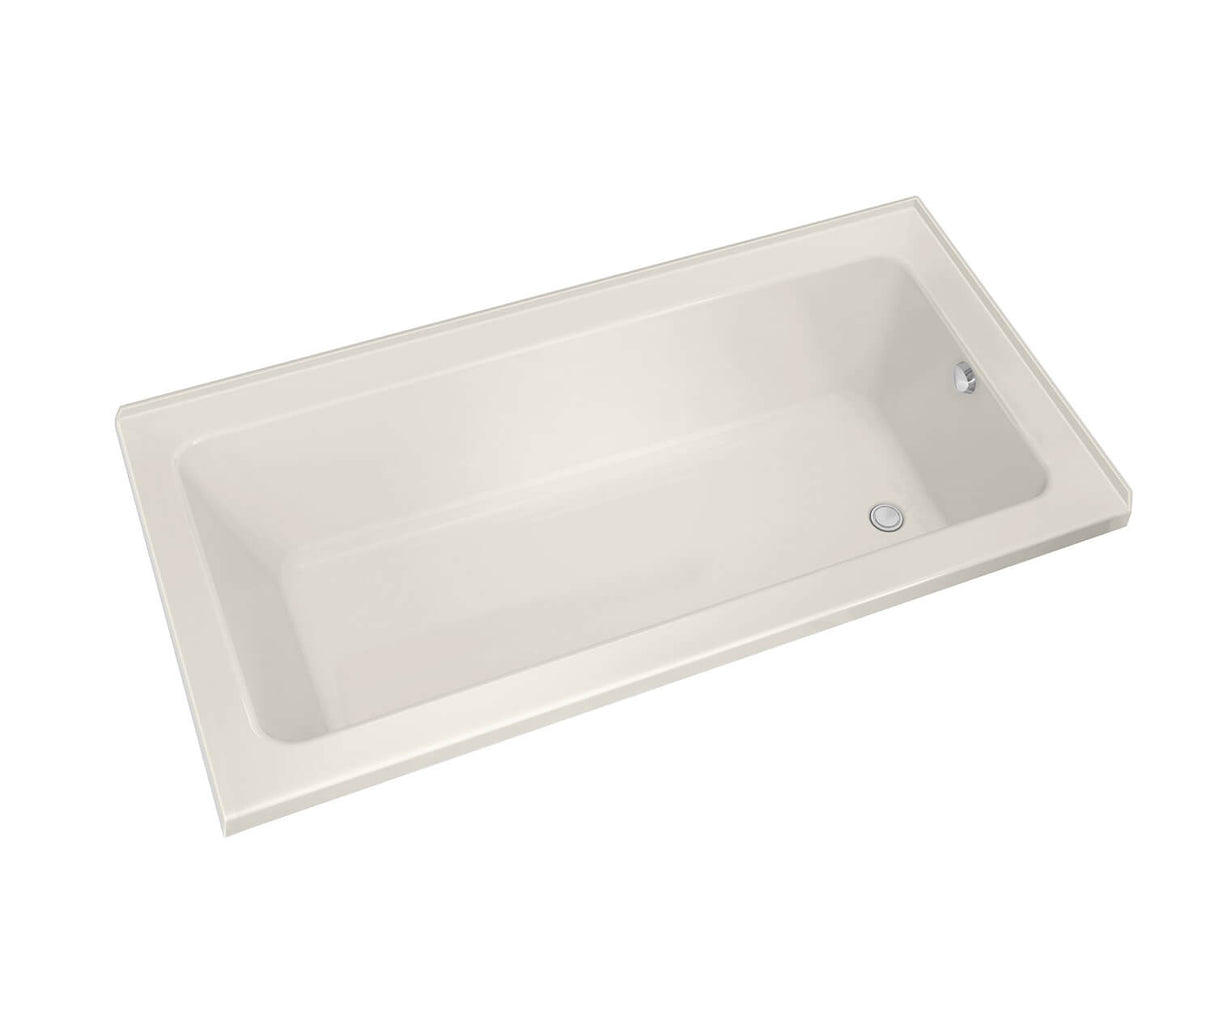 MAAX 106215-L-097-007 Pose 7242 IF Acrylic Corner Right Left-Hand Drain Combined Whirlpool & Aeroeffect Bathtub in Biscuit